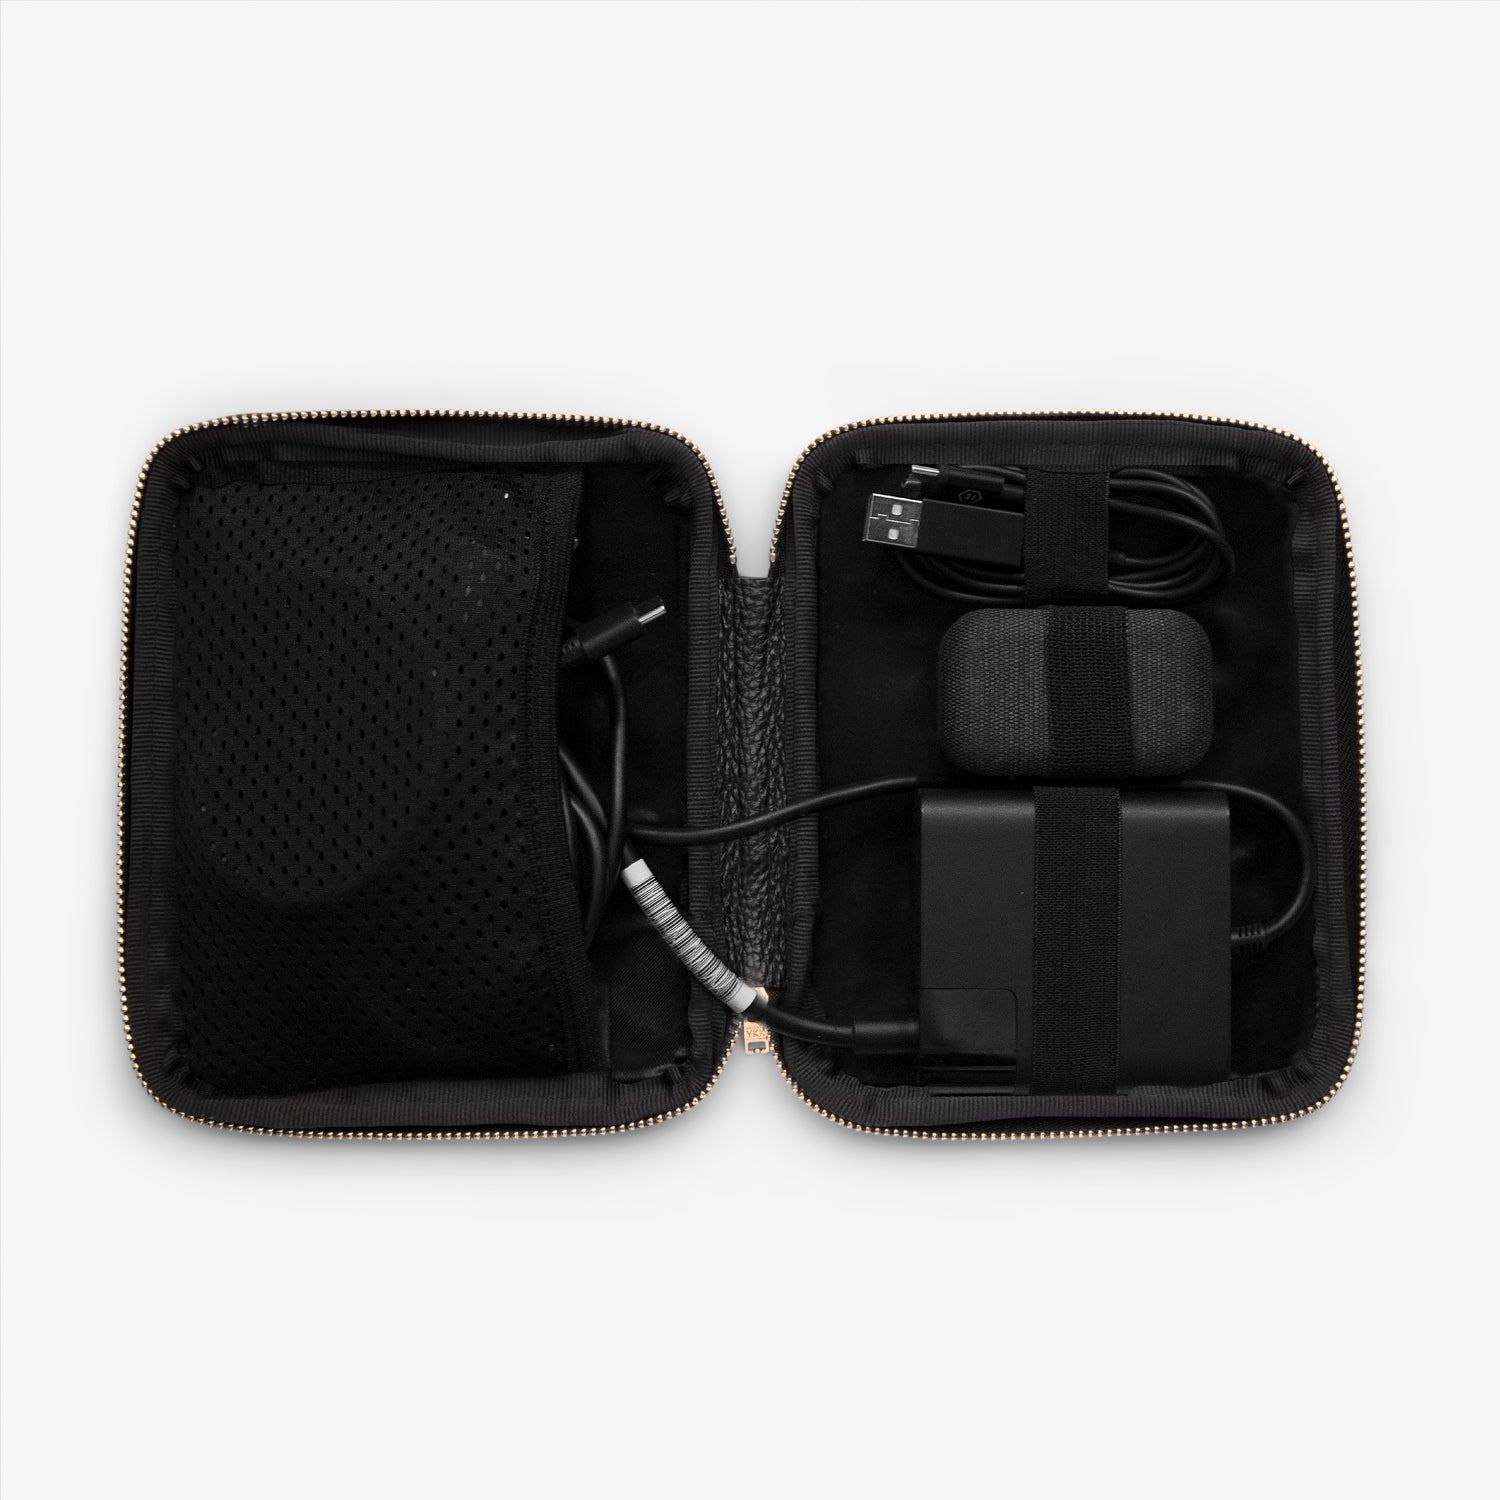 Shows the inside of a cable pocket displaying a computer charger, headphones, phone charger, and other cables, all neatly arranged and organized for easy access while on the go.